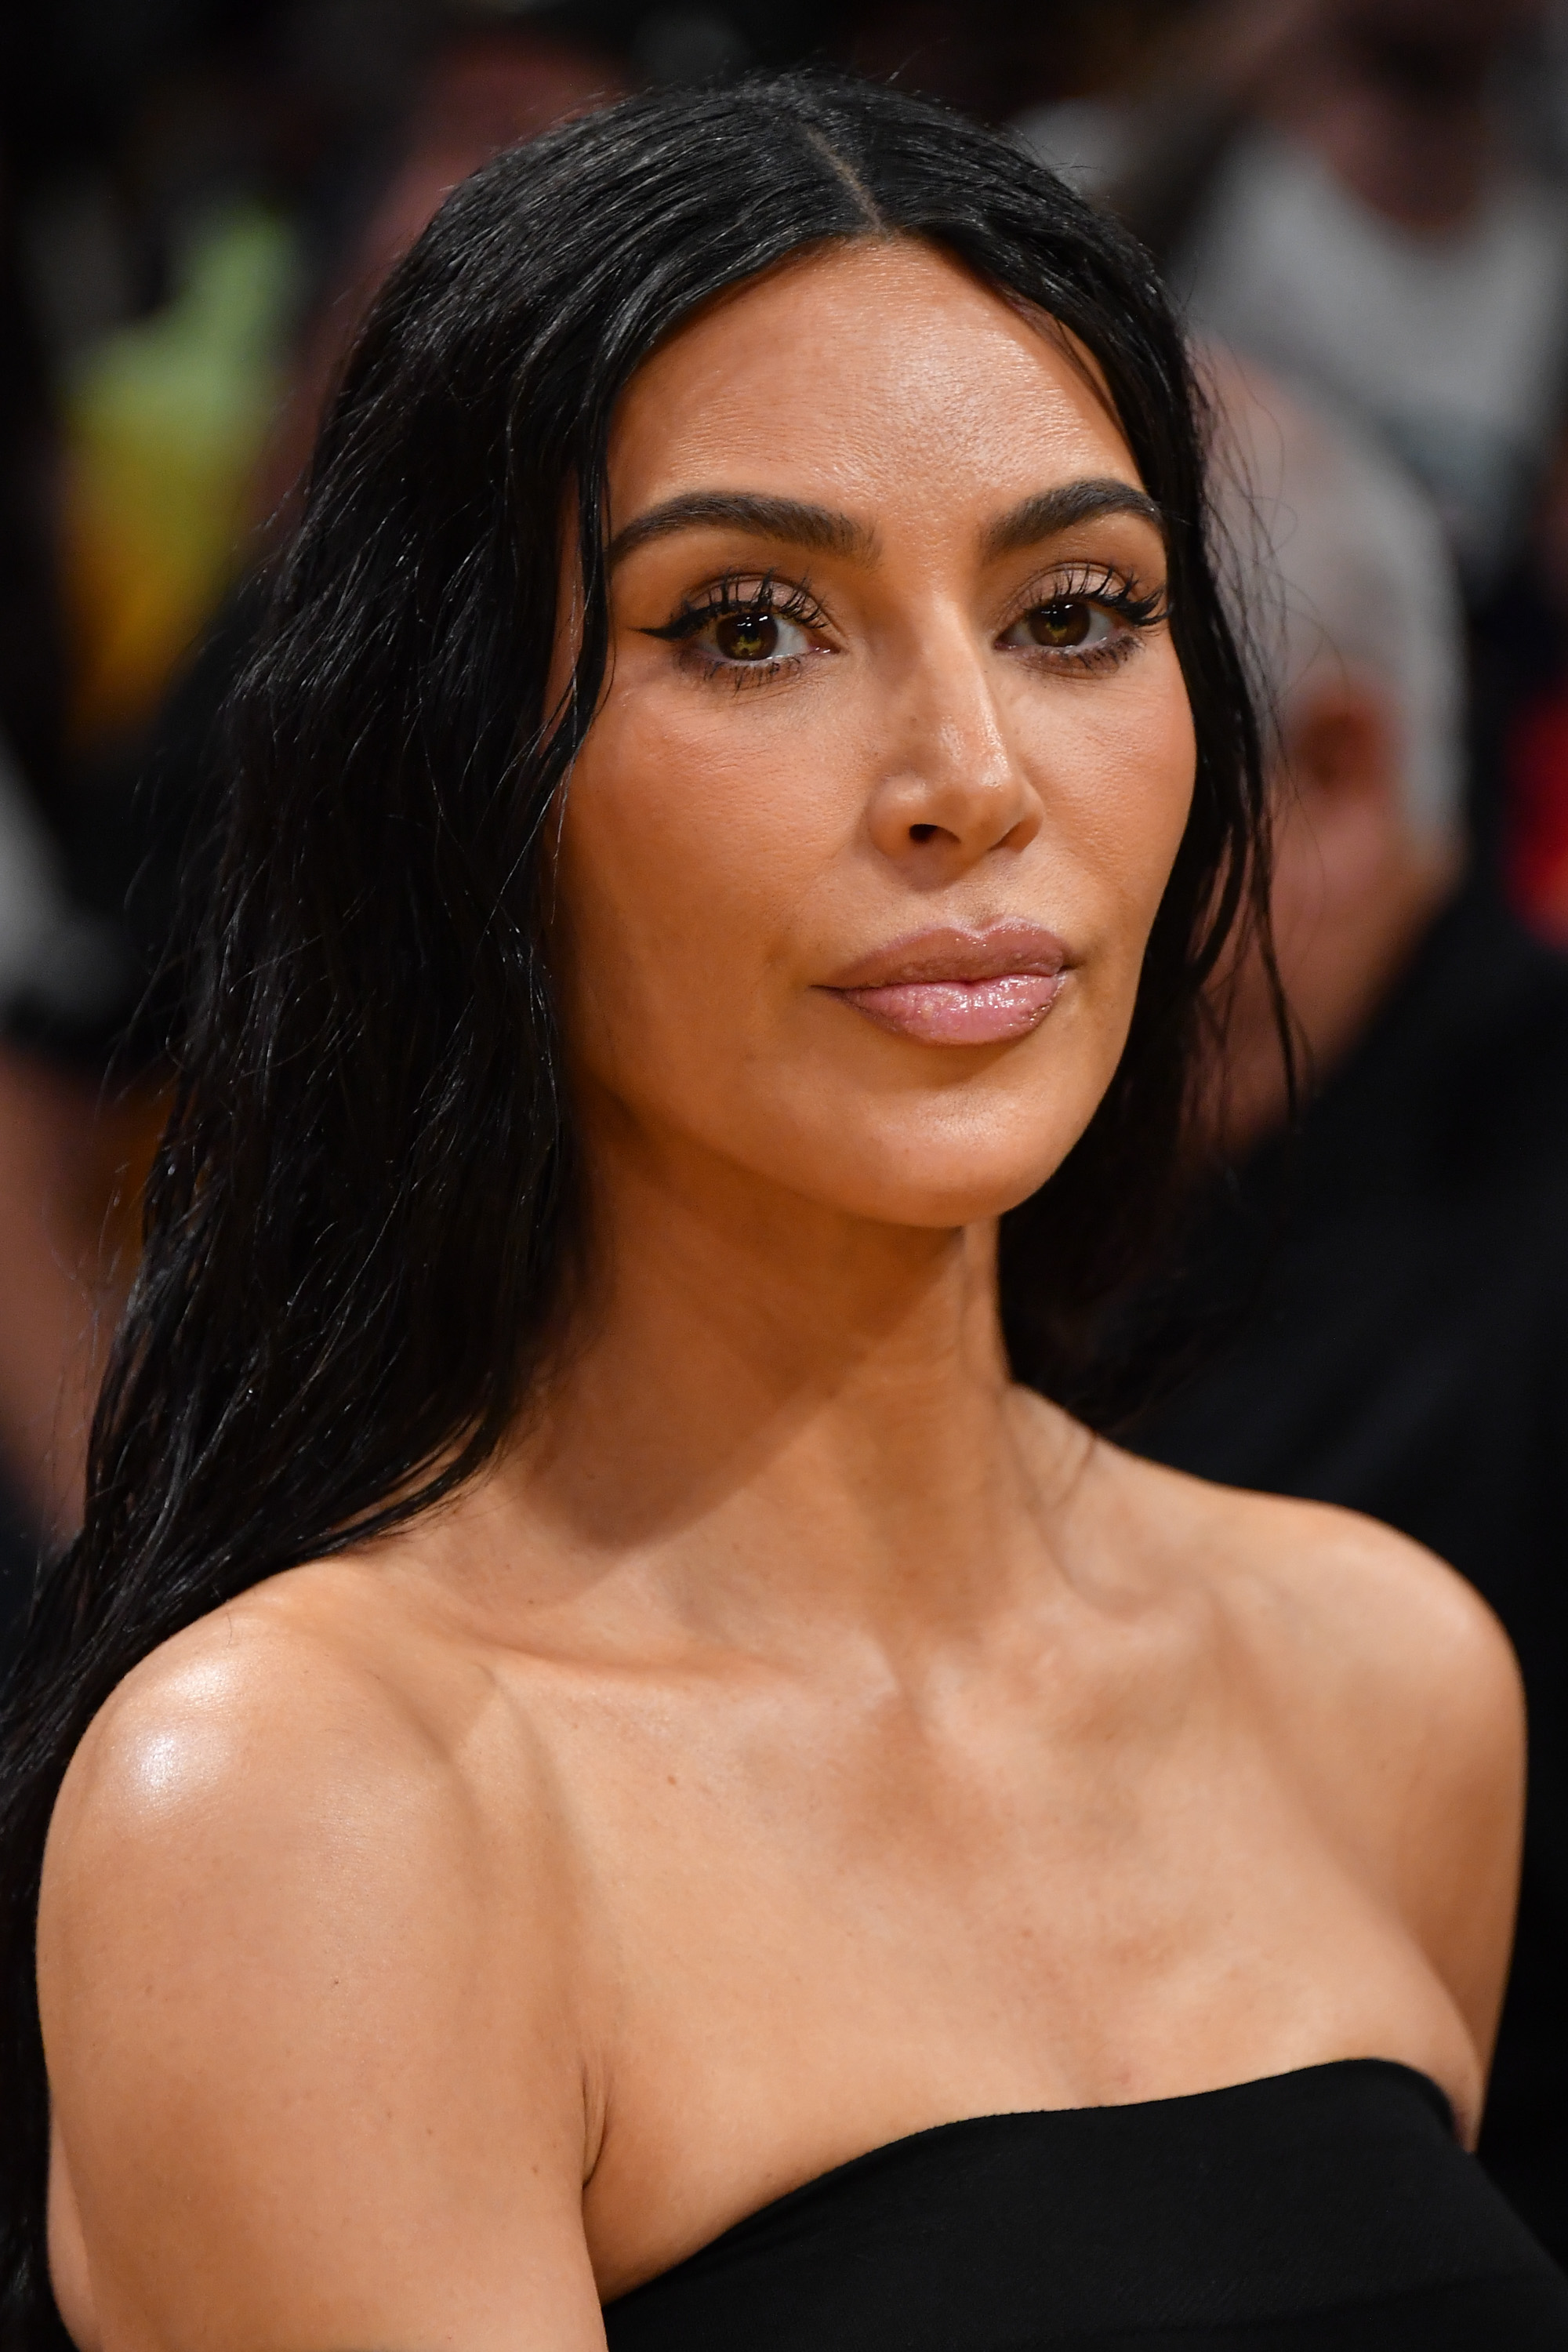 Fans speculated Kanye threw shade at Kim Kardashian in his birthday post for Bianca